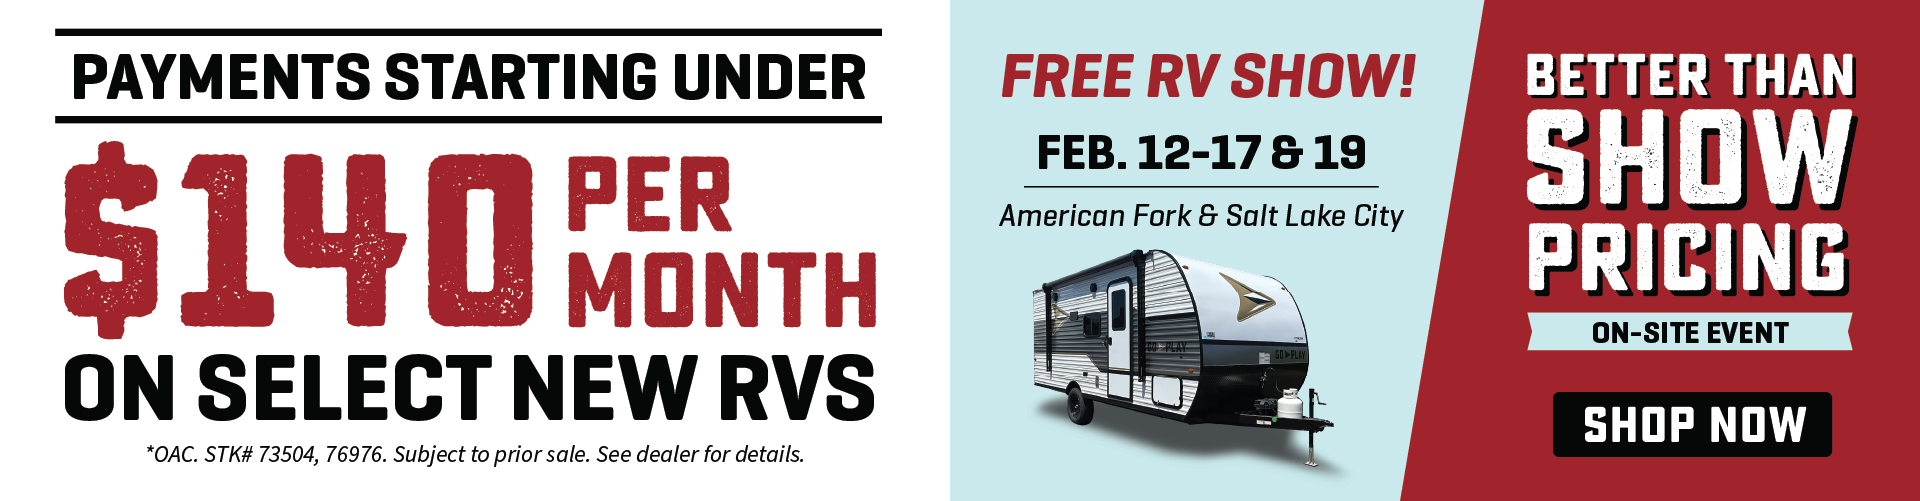 Payments starting under $140 per month OAC on select RVs - Better Than Show Pricing On-Site Event - Feb. 12-17 & 19 - Bish's RV of American Fork & Salt Lake City